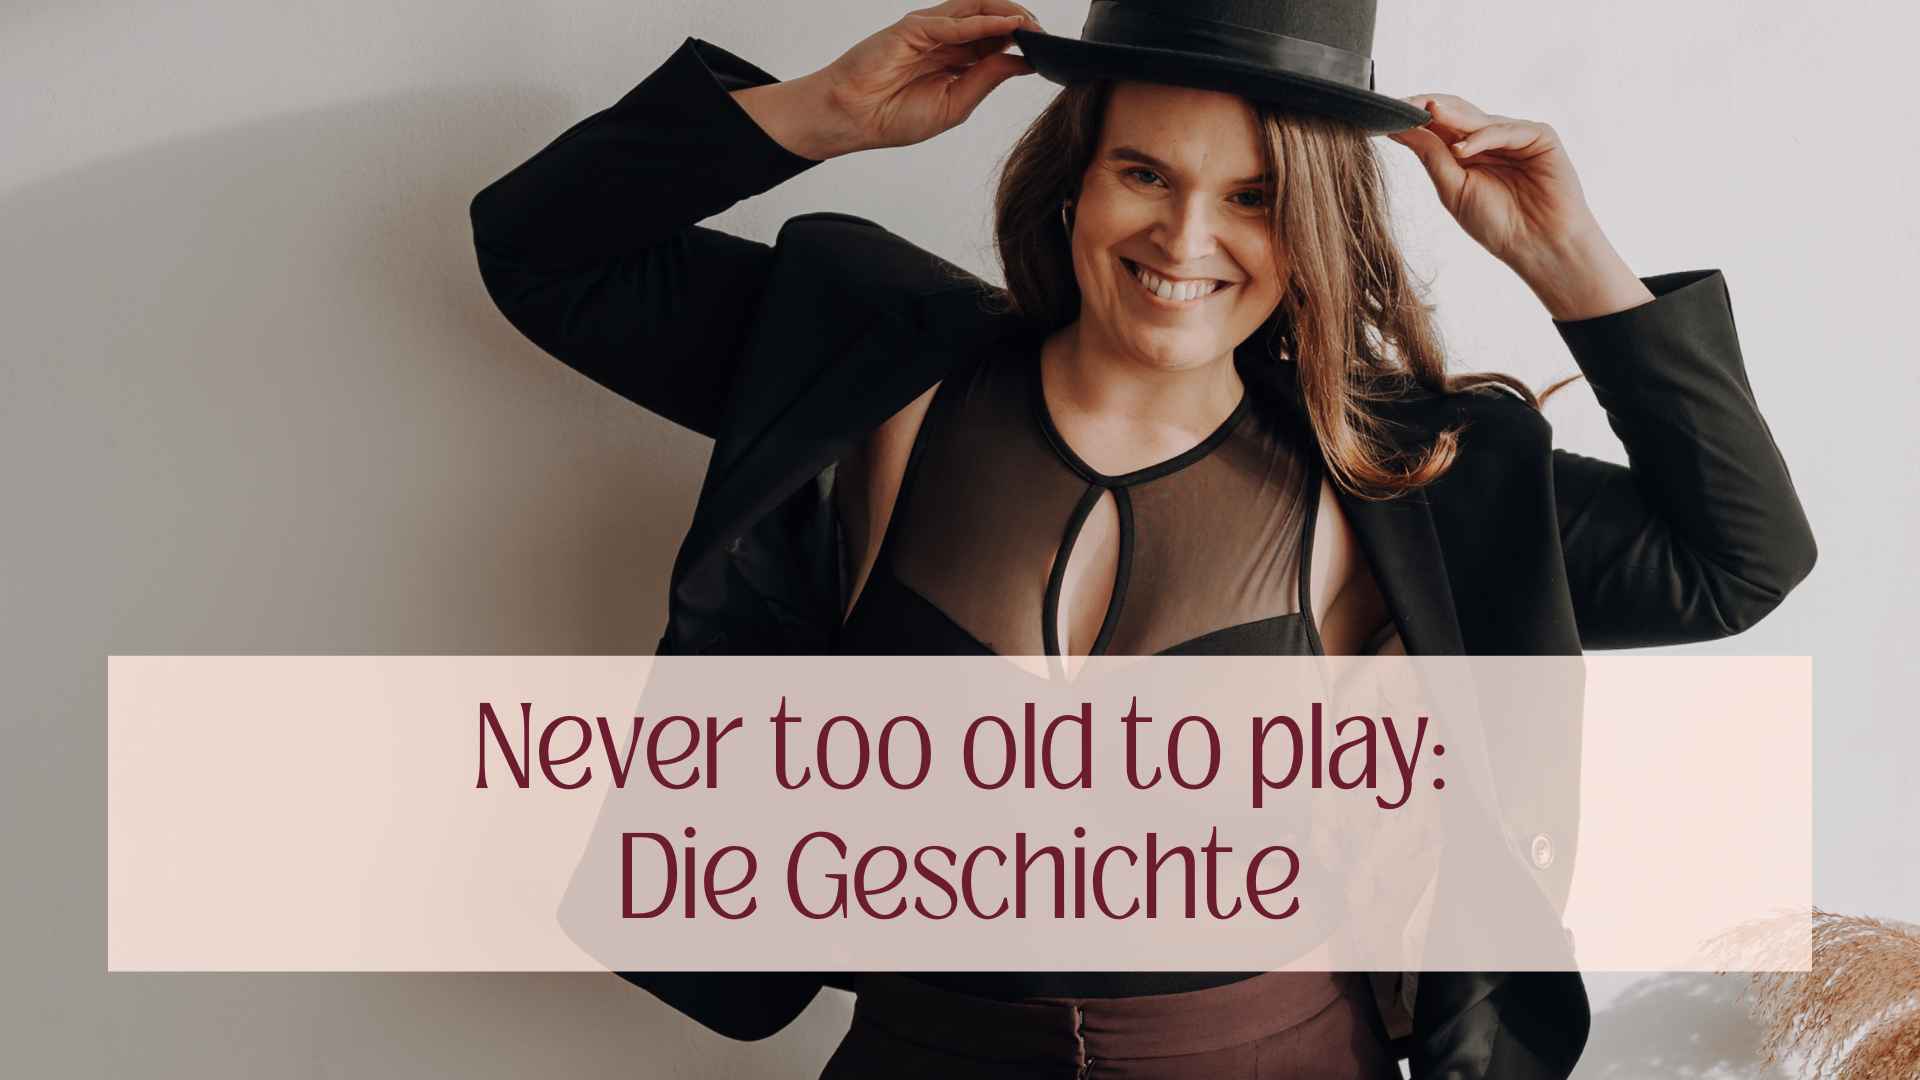 Julia:Never too to old to play!